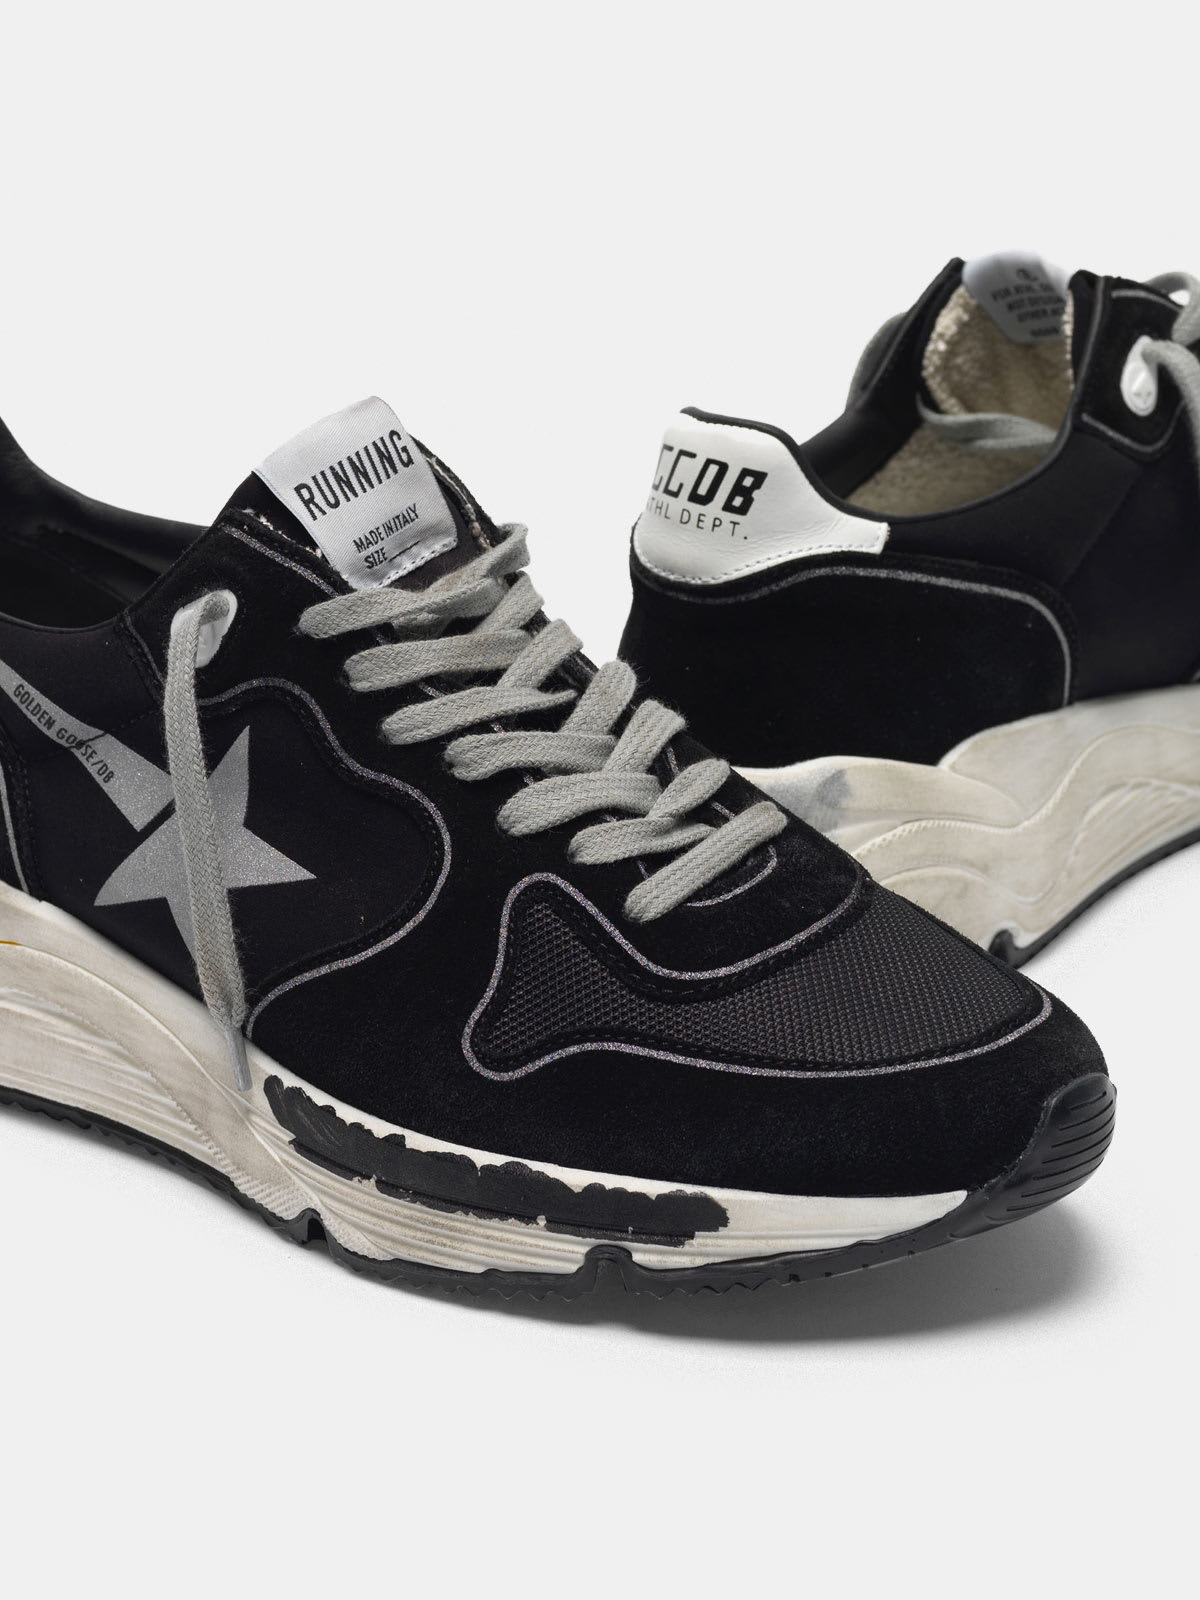 Black Running Sole sneakers with silver star | Golden Goose